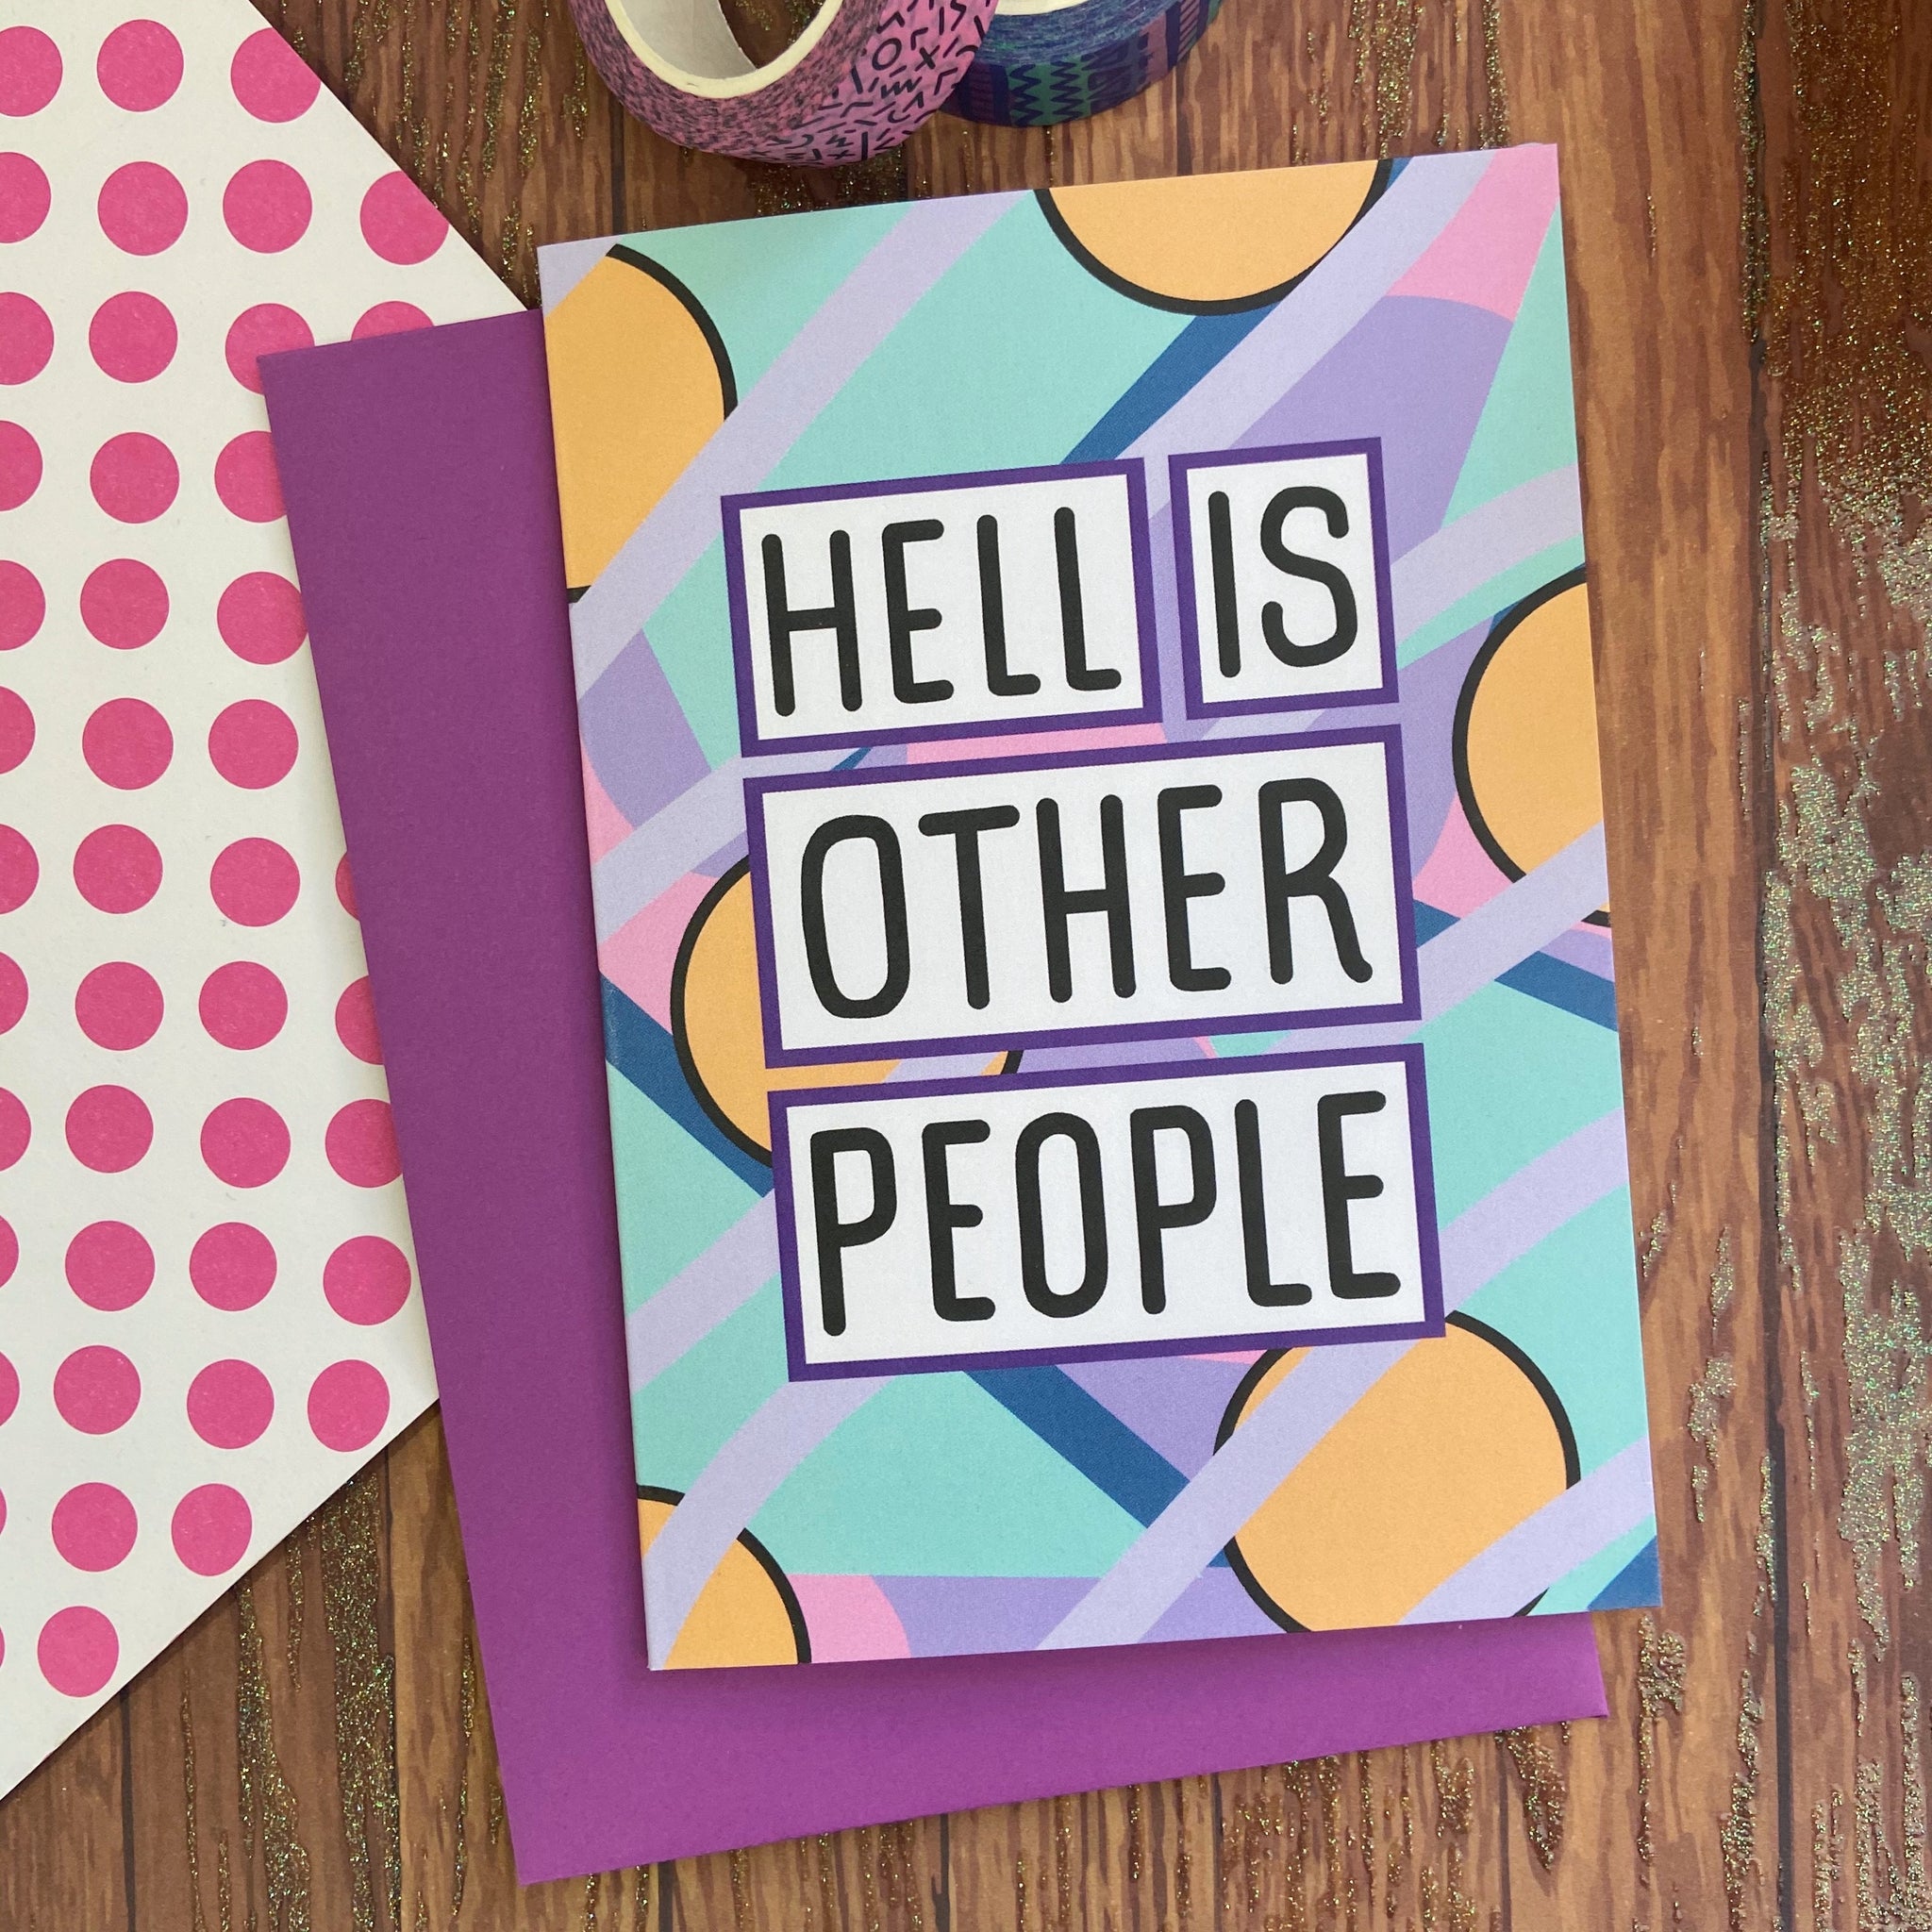 SALE Hell Is Other People Card